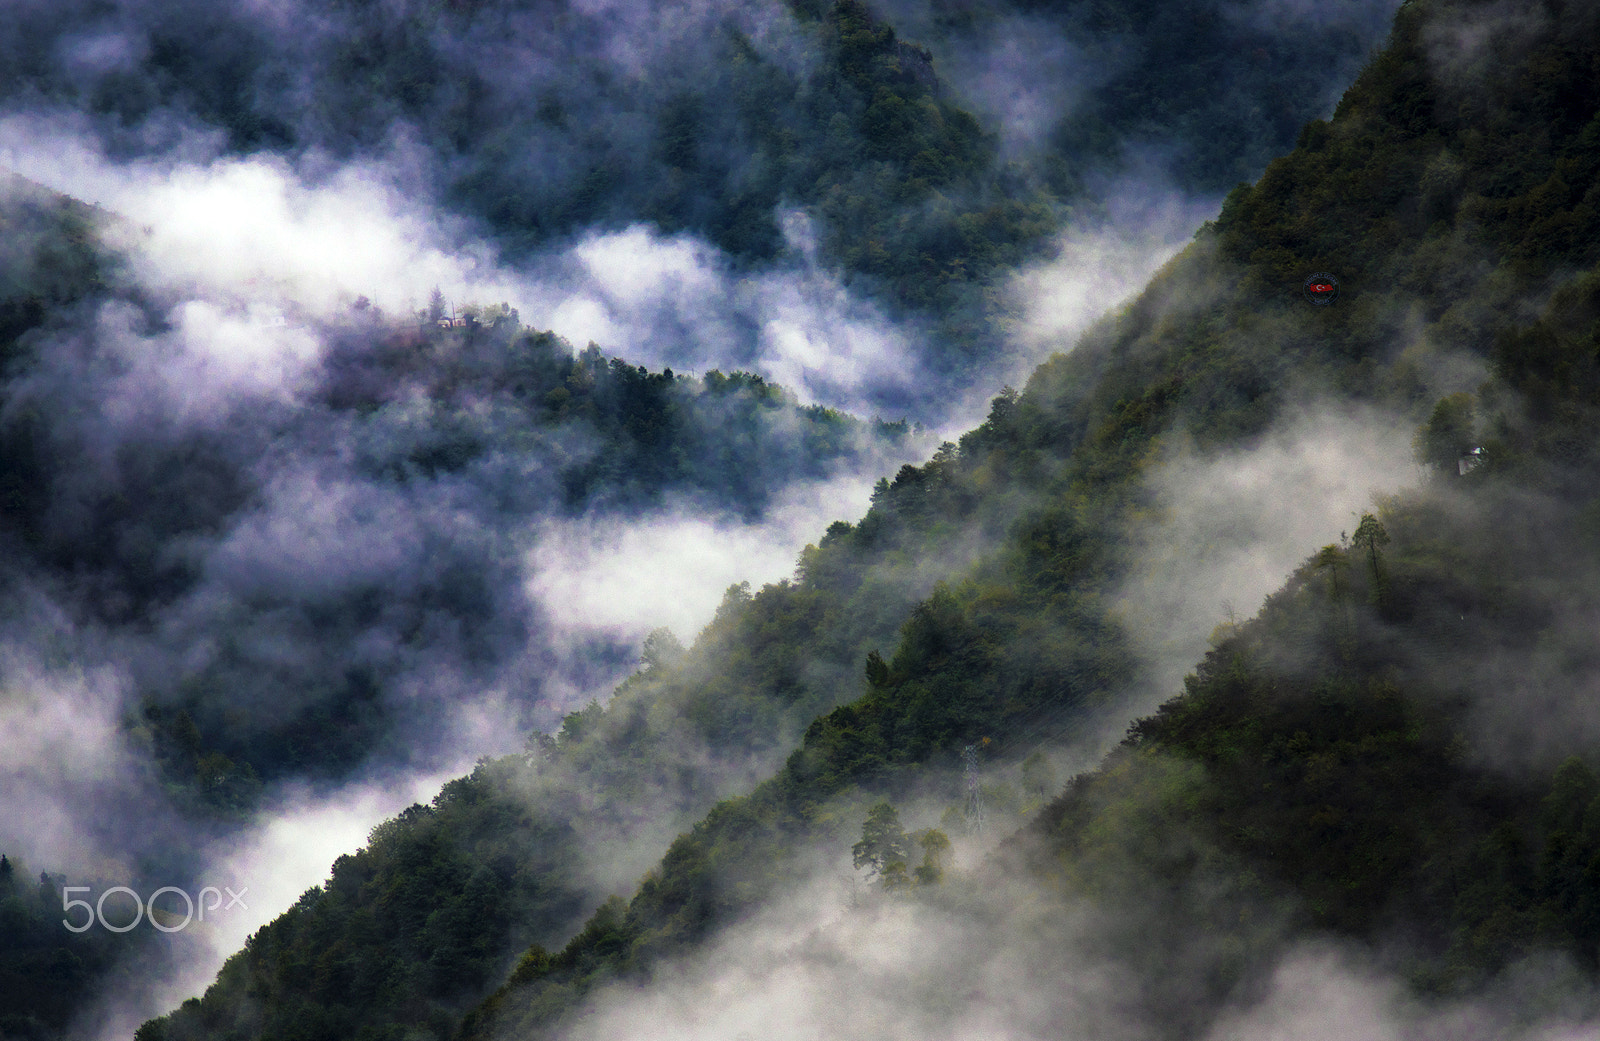 Pentax K-3 II sample photo. Clouds and forests. photography